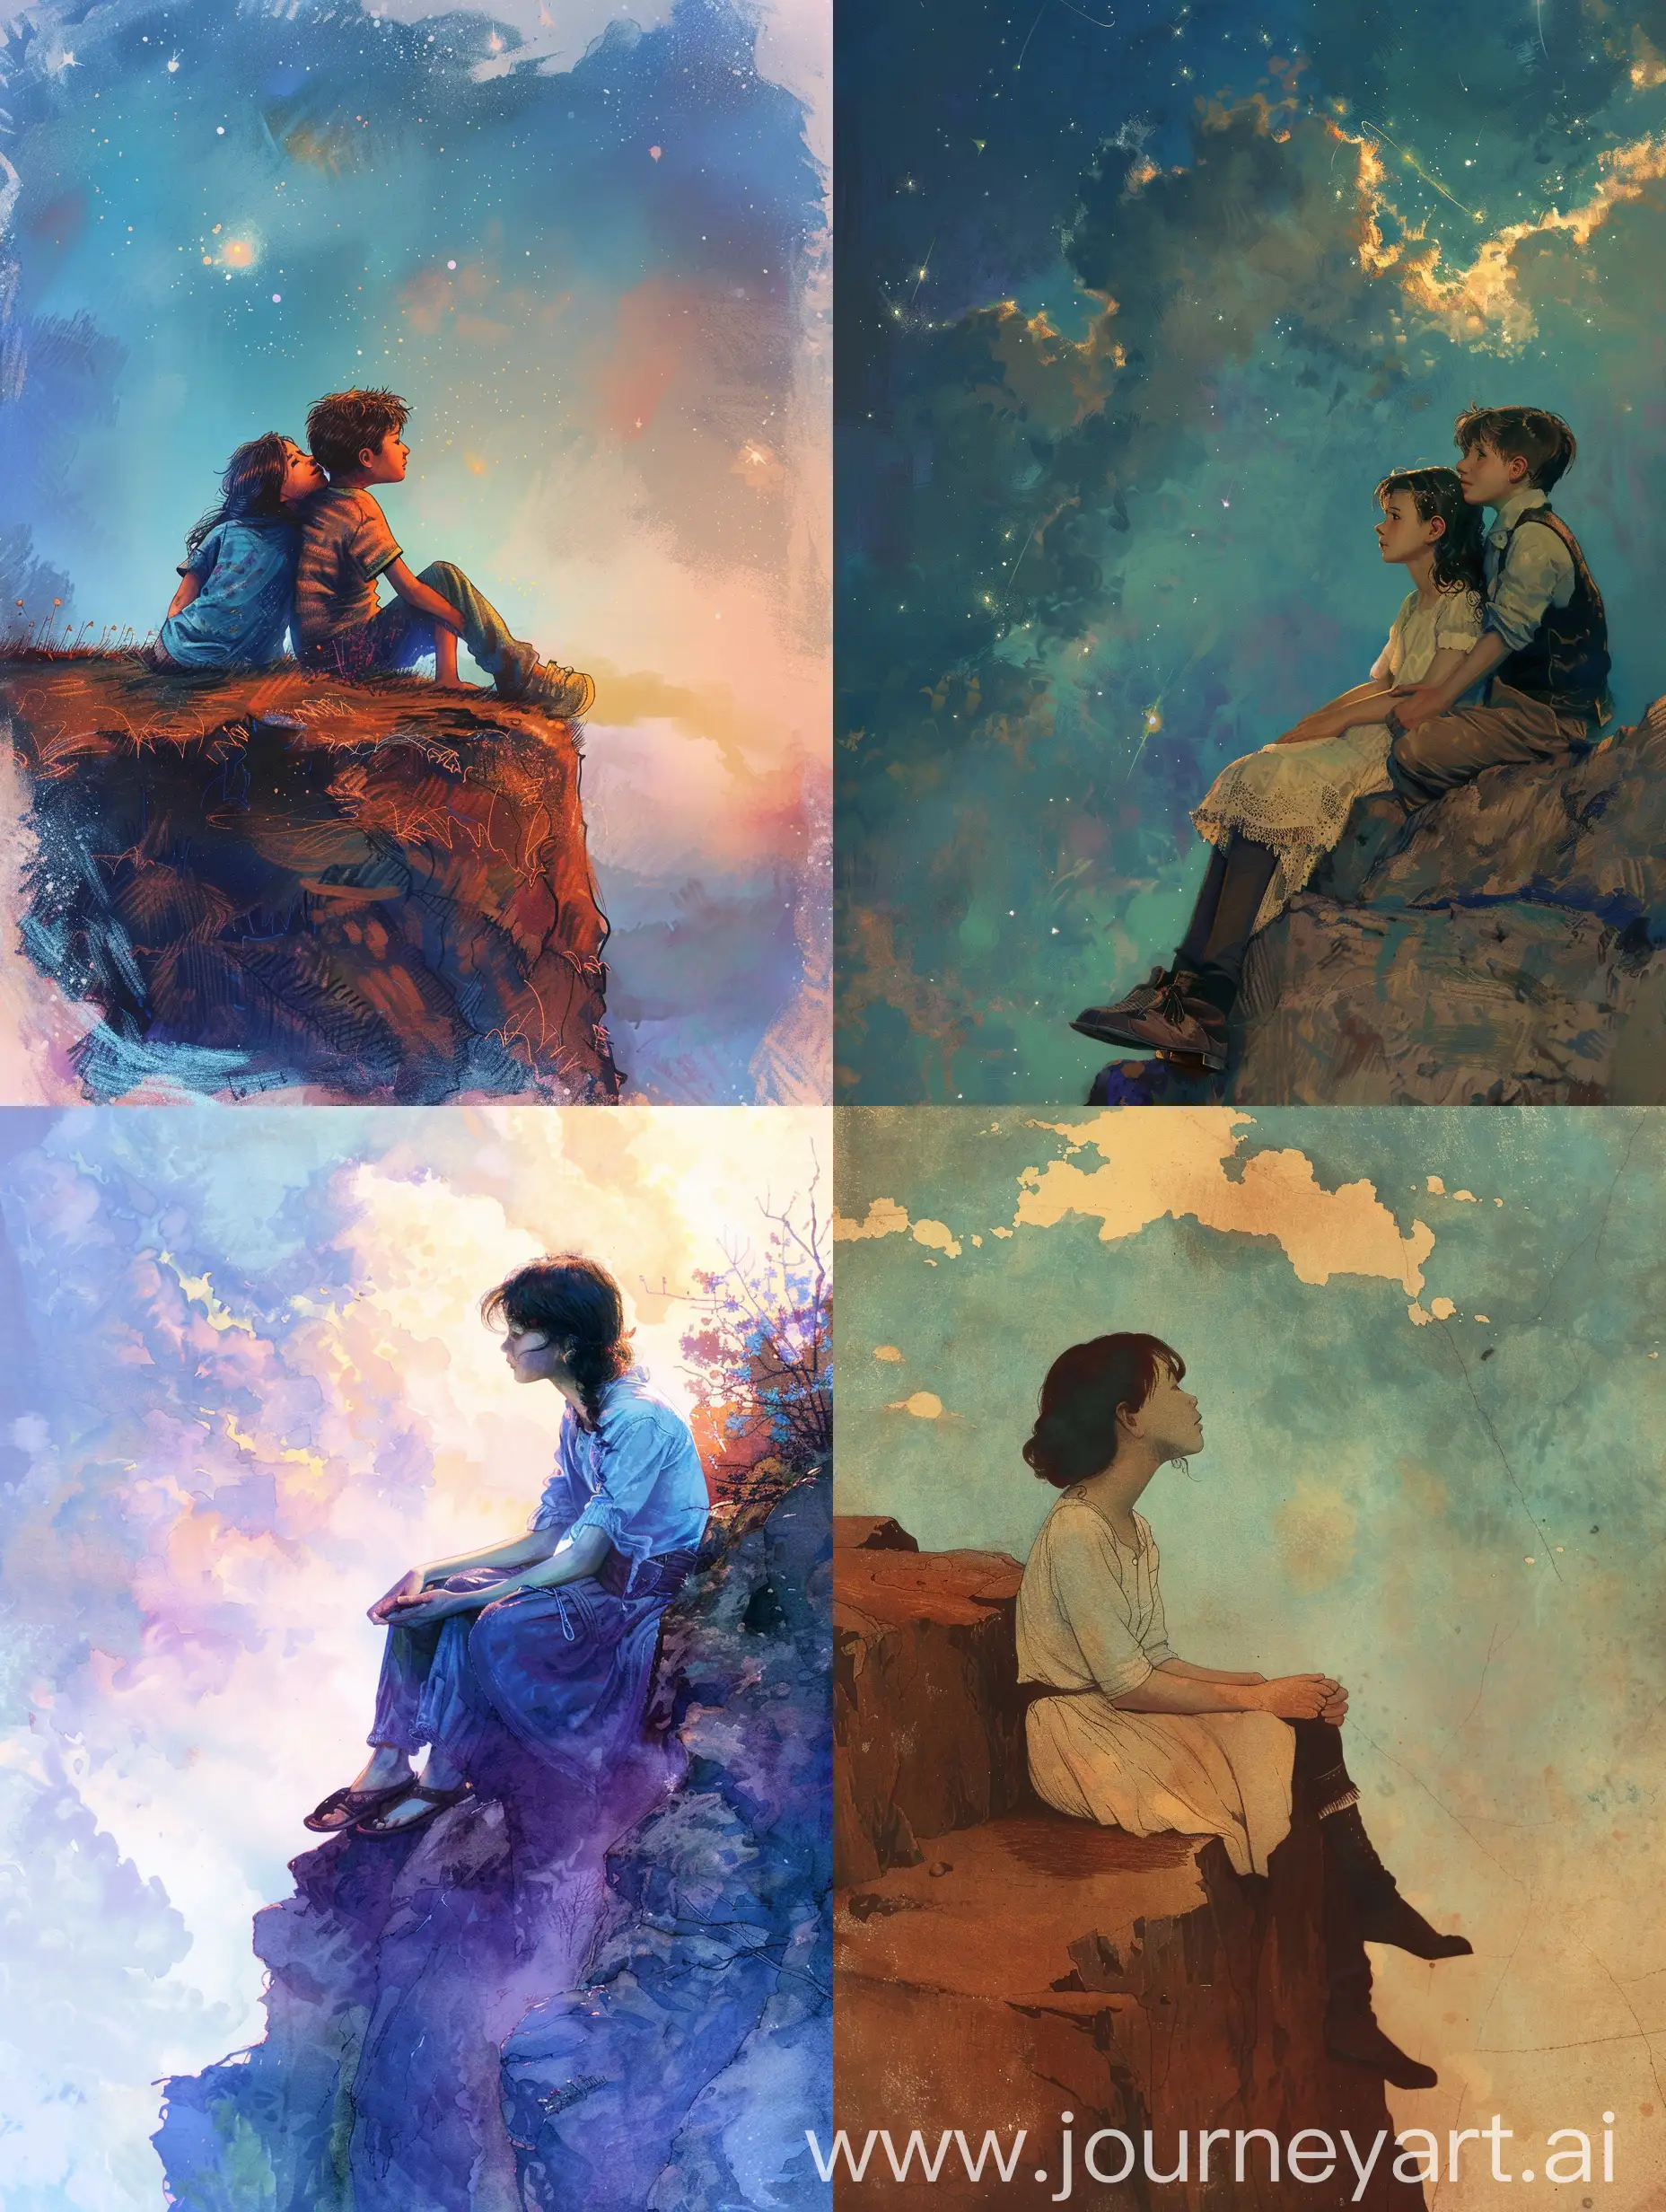 A girl sitting with a boy on a cliff edge, looking at the sky with her head on the lap of the boy